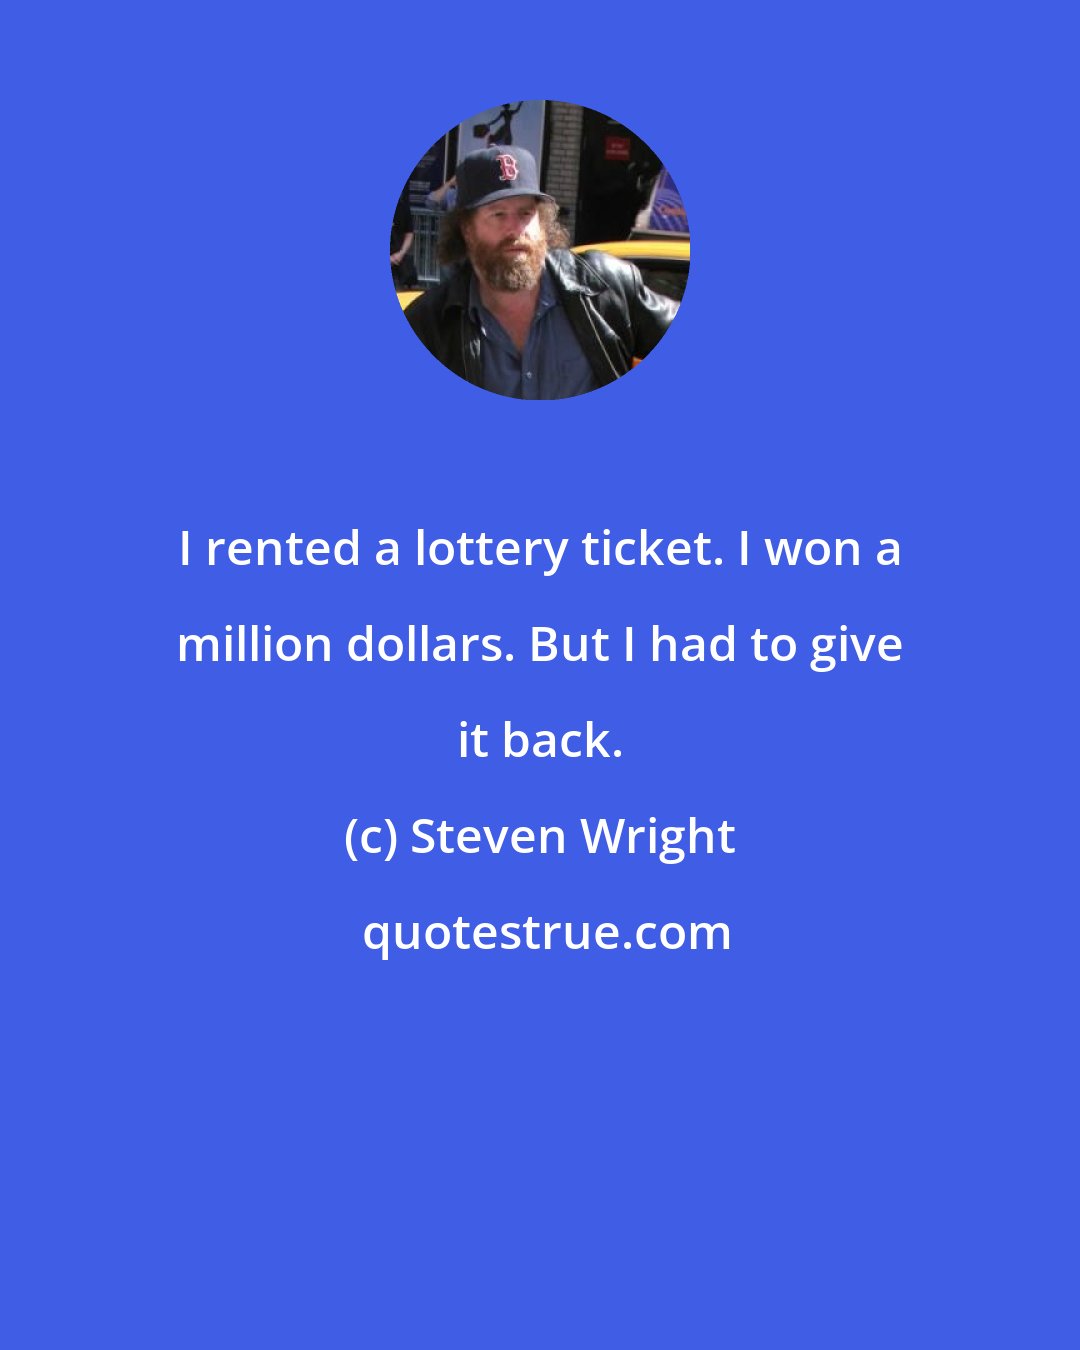 Steven Wright: I rented a lottery ticket. I won a million dollars. But I had to give it back.